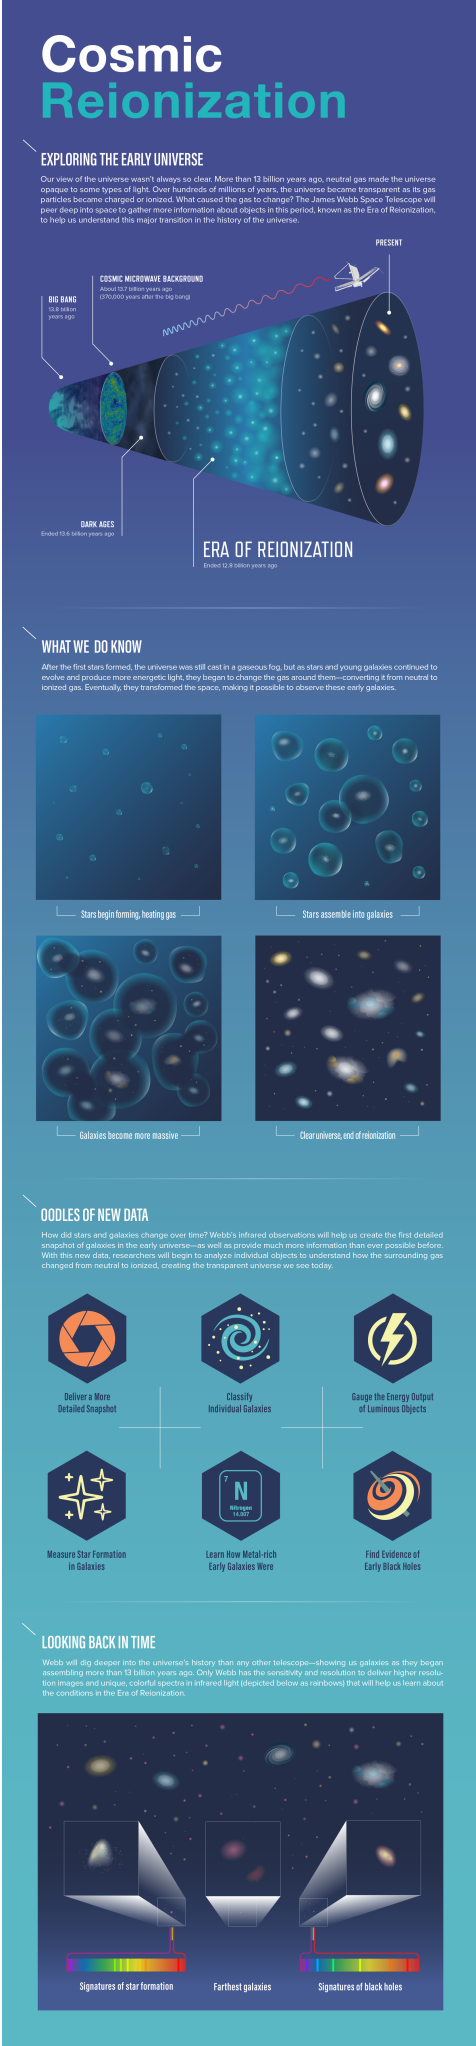 Infographic about Cosmic Reionization